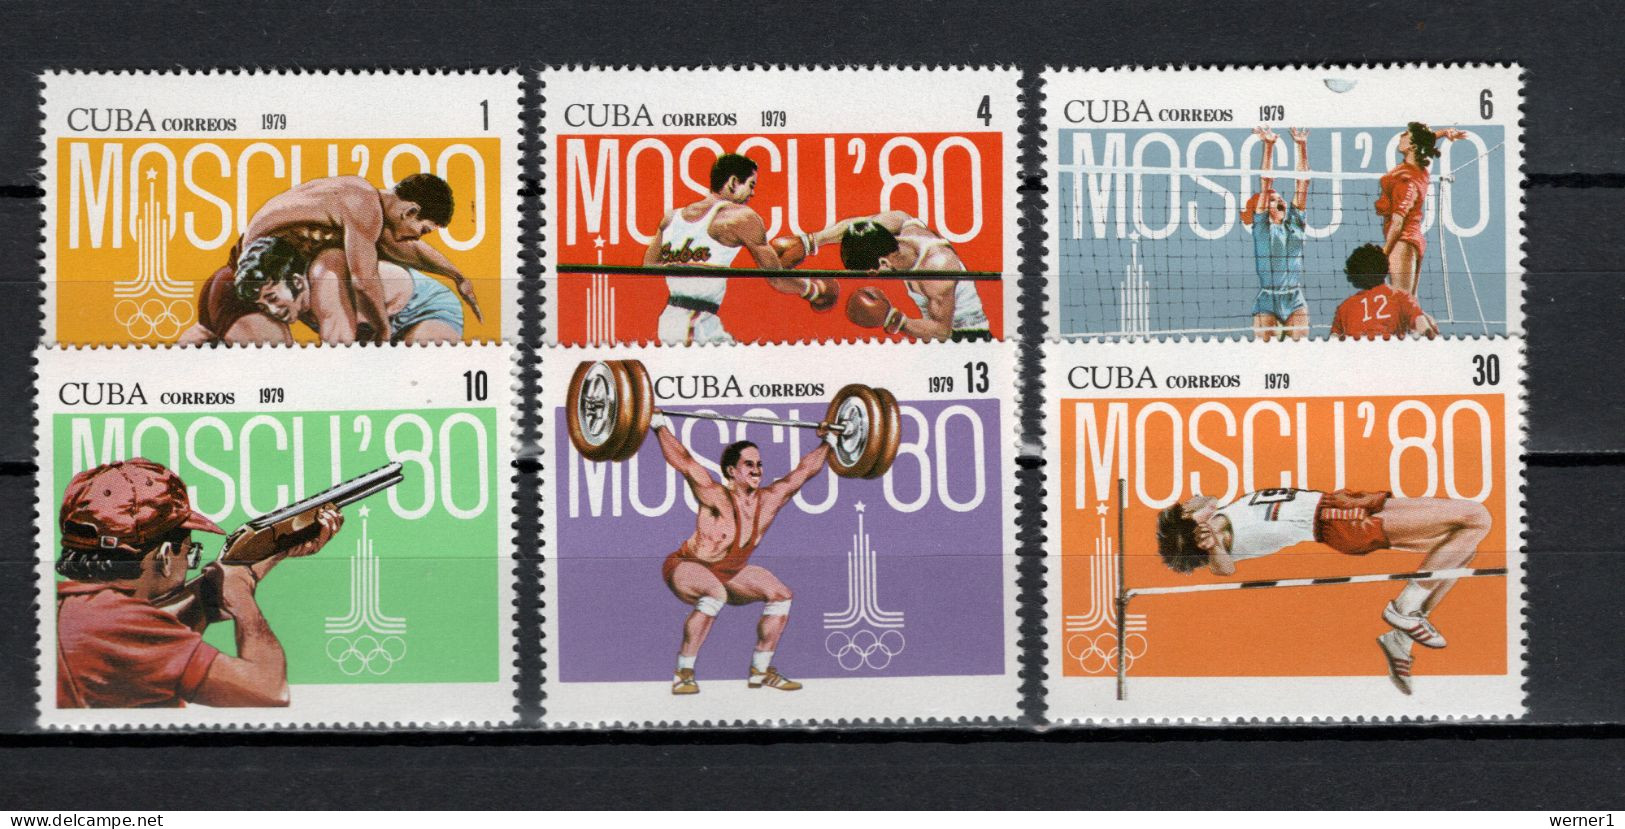 Cuba 1979 Olympic Games Moscow, Wrestling, Boxing, Volleyball, Shooting Etc. Set Of 6 MNH - Estate 1980: Mosca